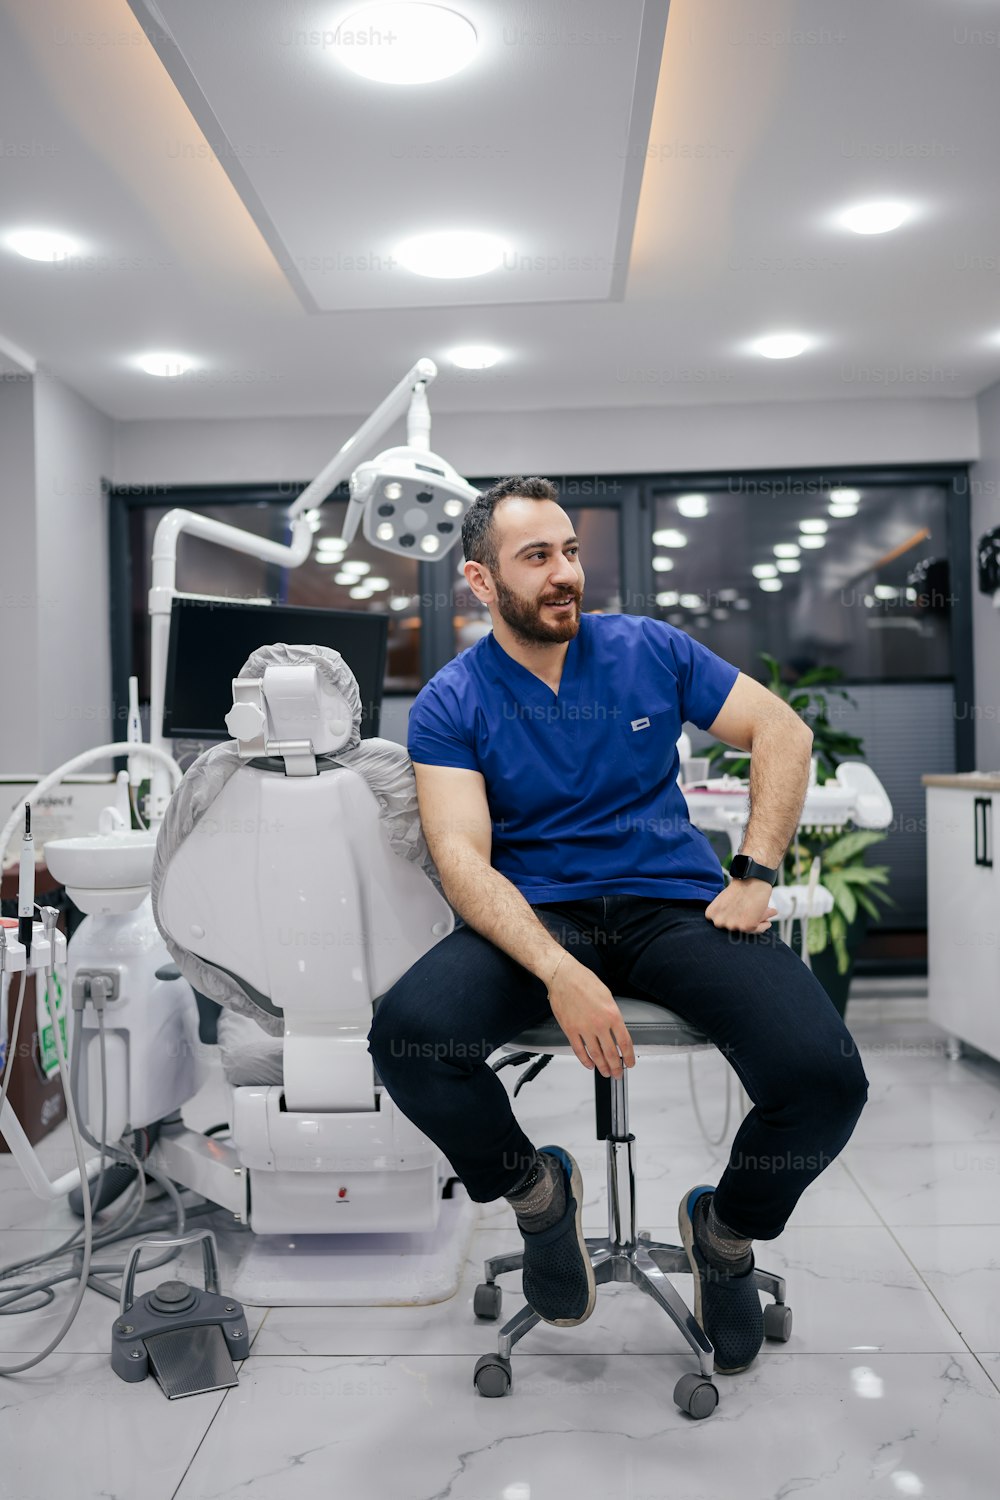 a man sitting on a chair in a dental office